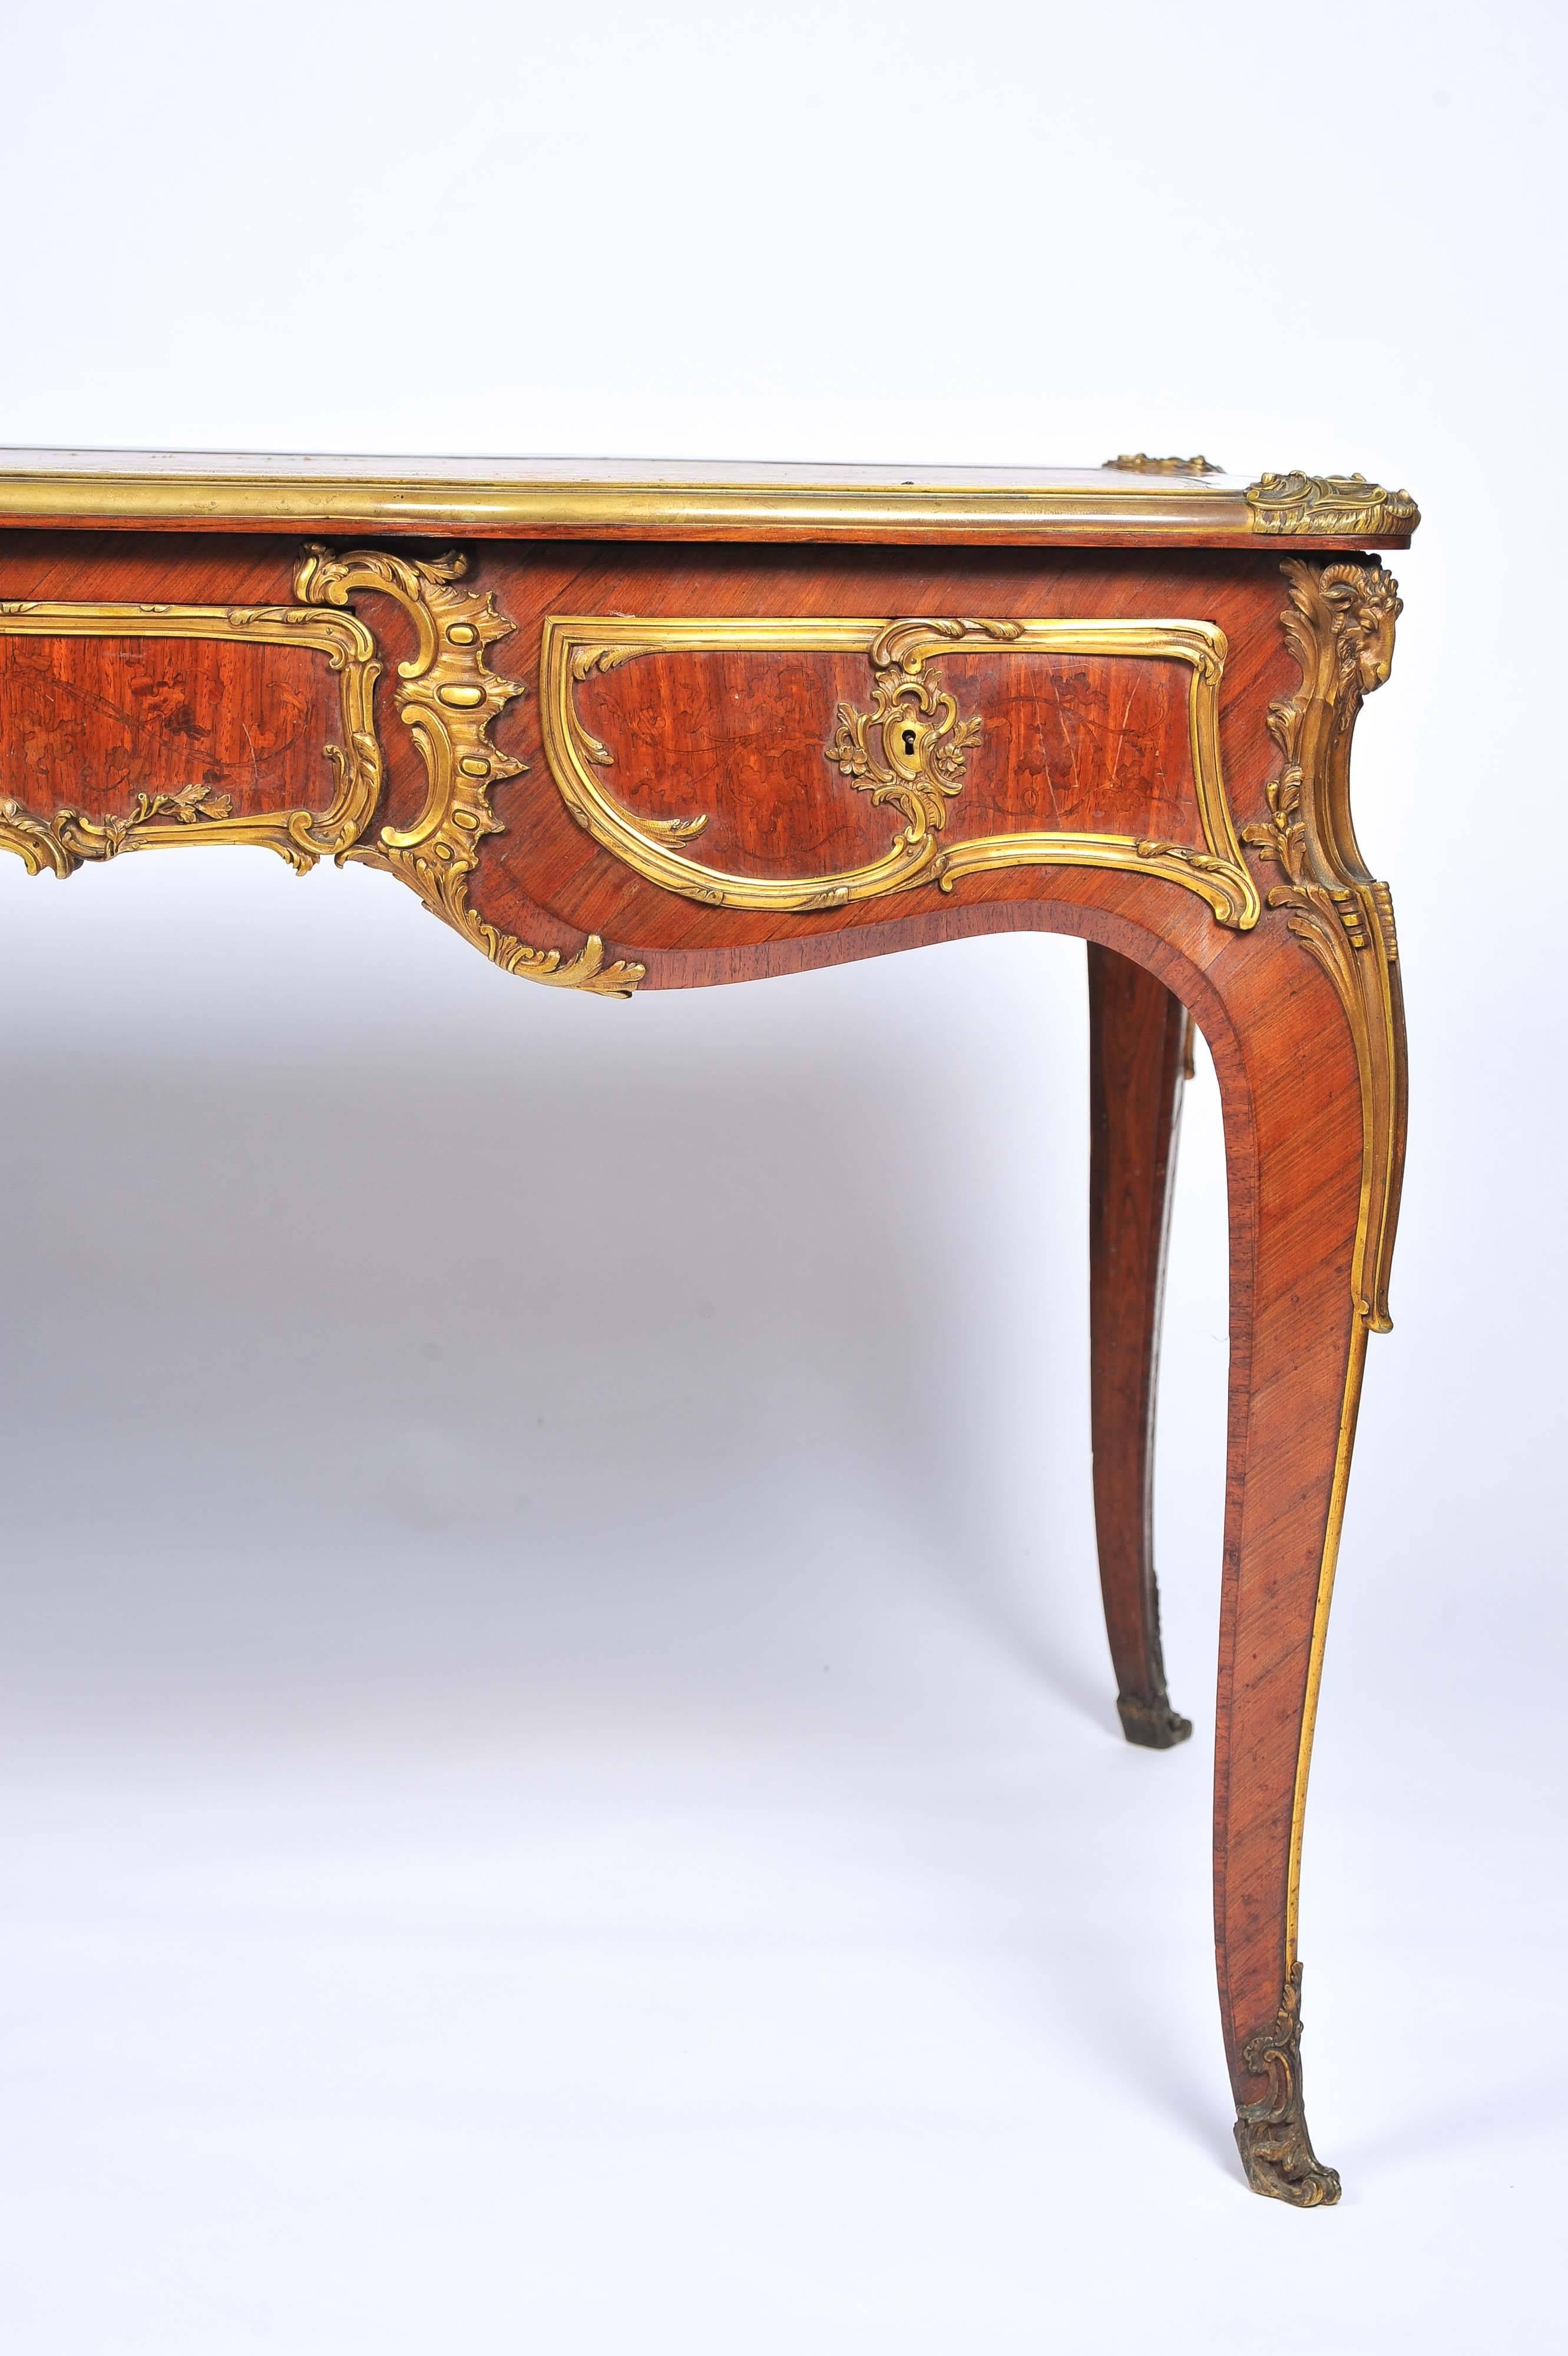 A fine quality 19th century Louis XV style, ormolu-mounted, kingwood bureau plat, stamped 'Zwiener'
Having an inset leather top, three frieze drawers with dummy drawers to the reverse side. Marquetry inlaid panels and raised on elegant